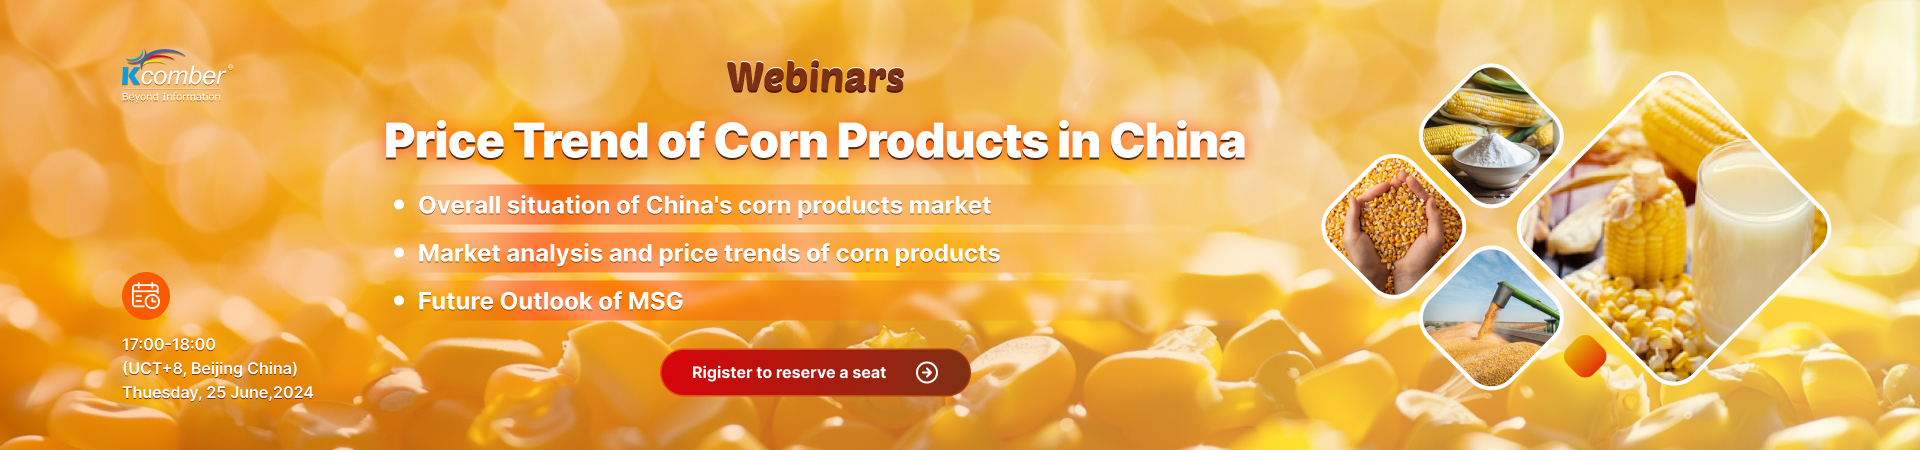 Price Trend of Corn Products in China